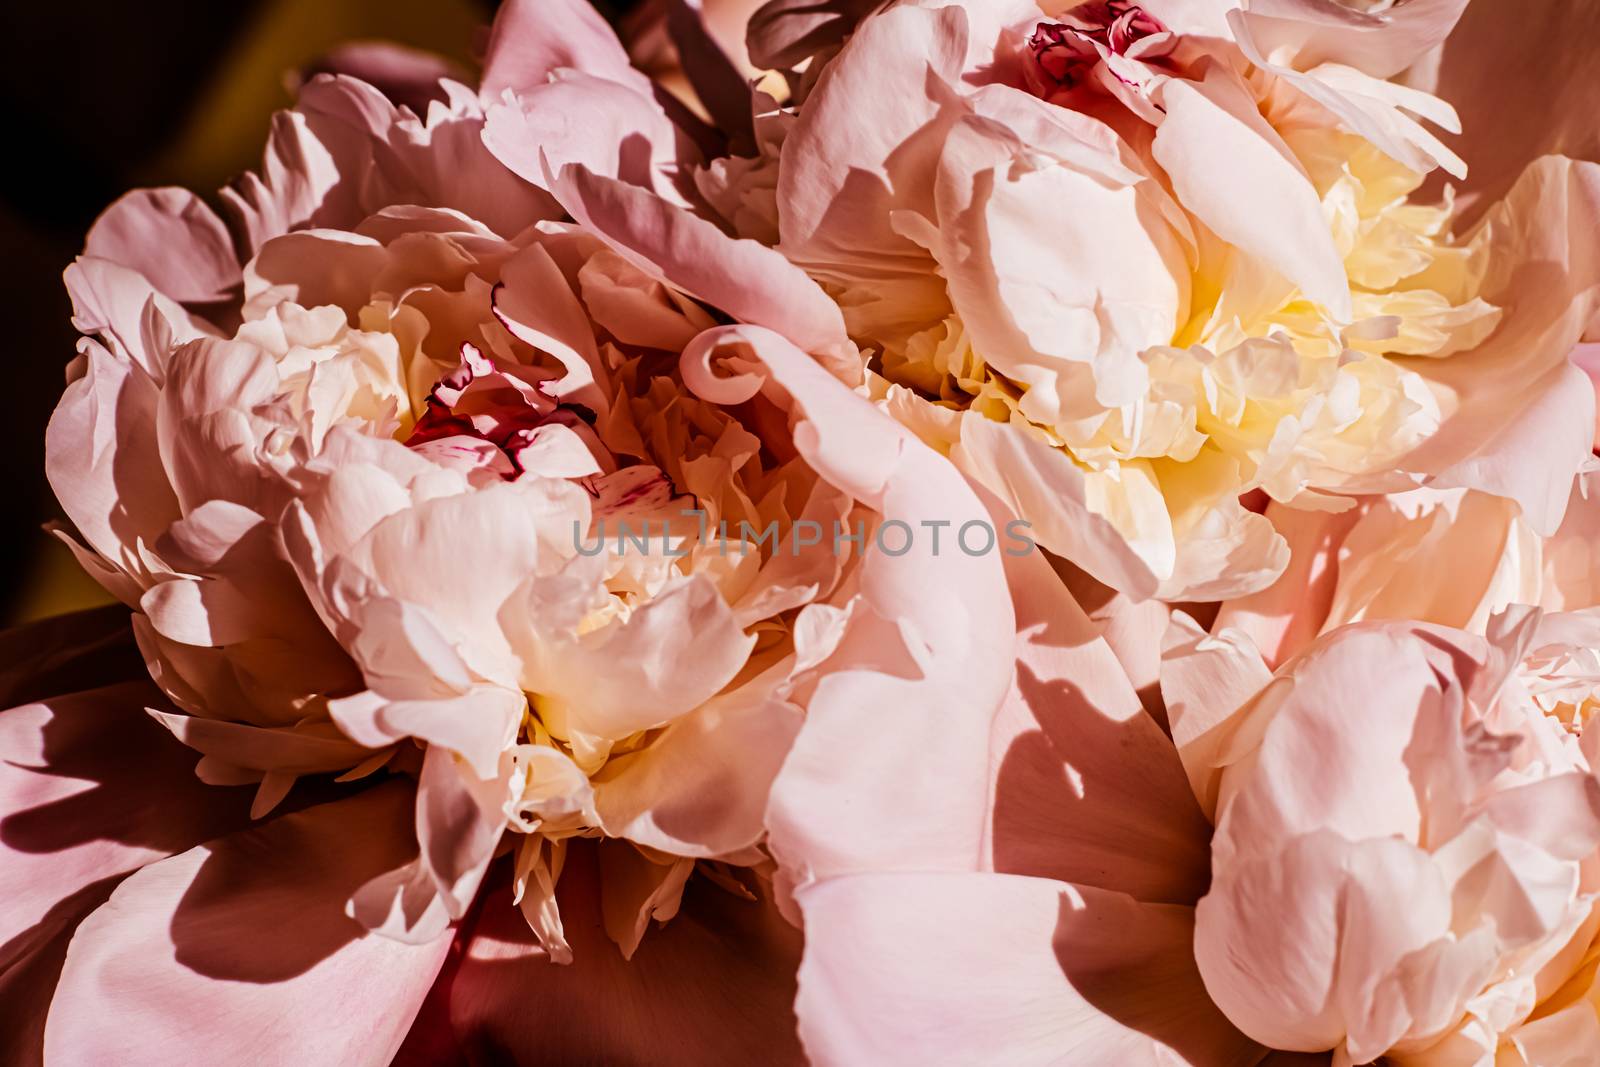 Peony flowers as luxury floral background, wedding decoration and event branding design